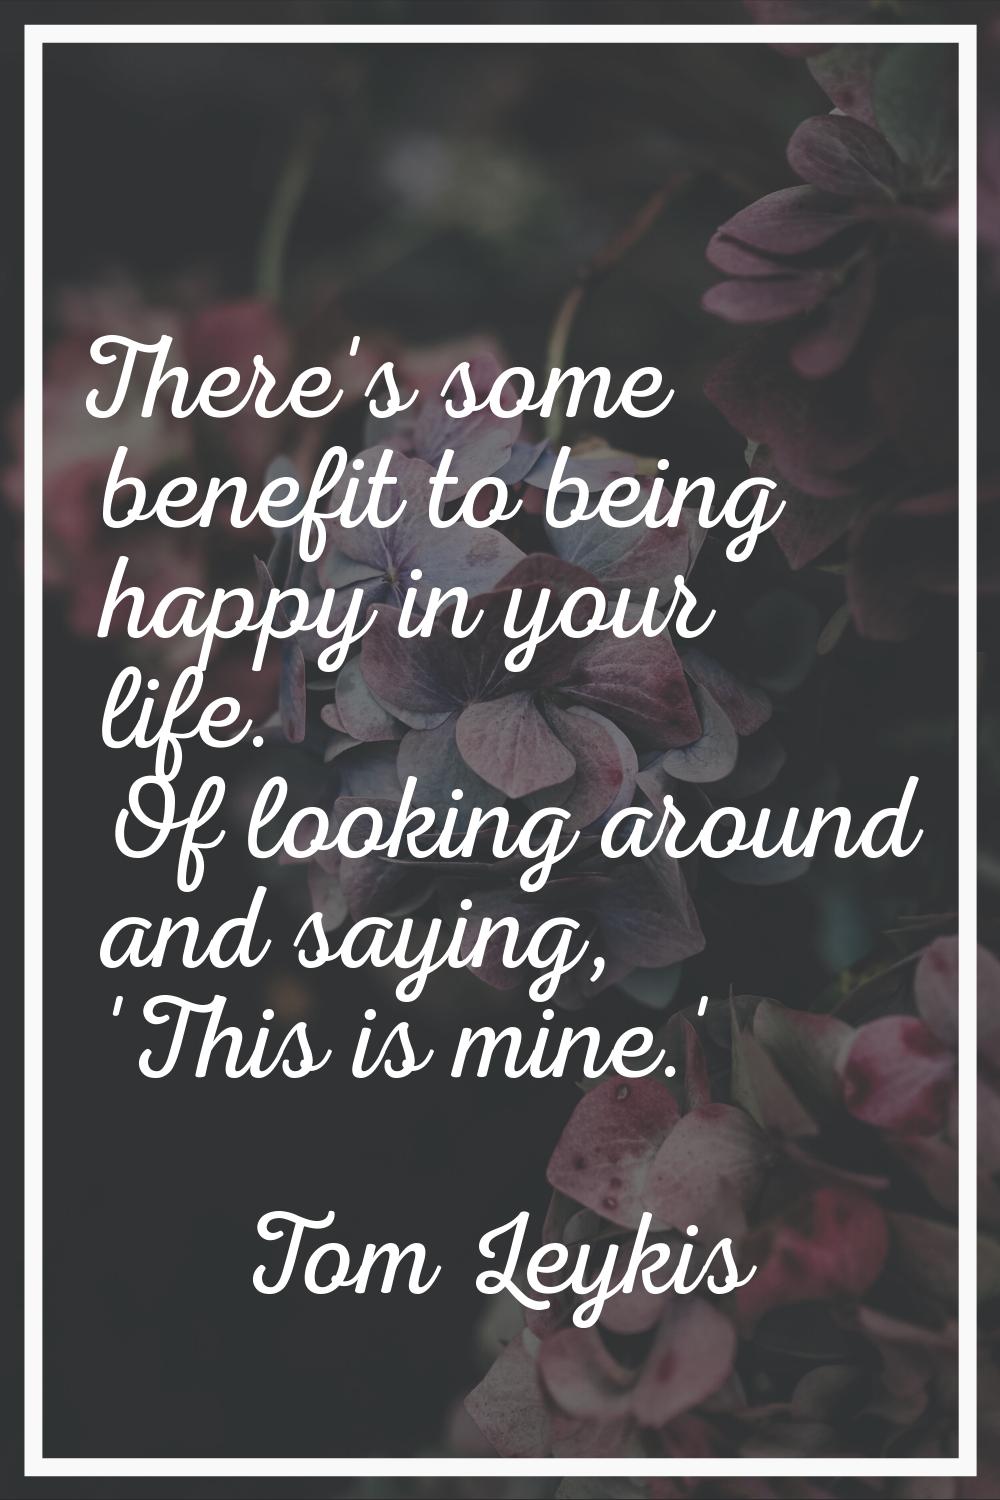 There's some benefit to being happy in your life. Of looking around and saying, 'This is mine.'